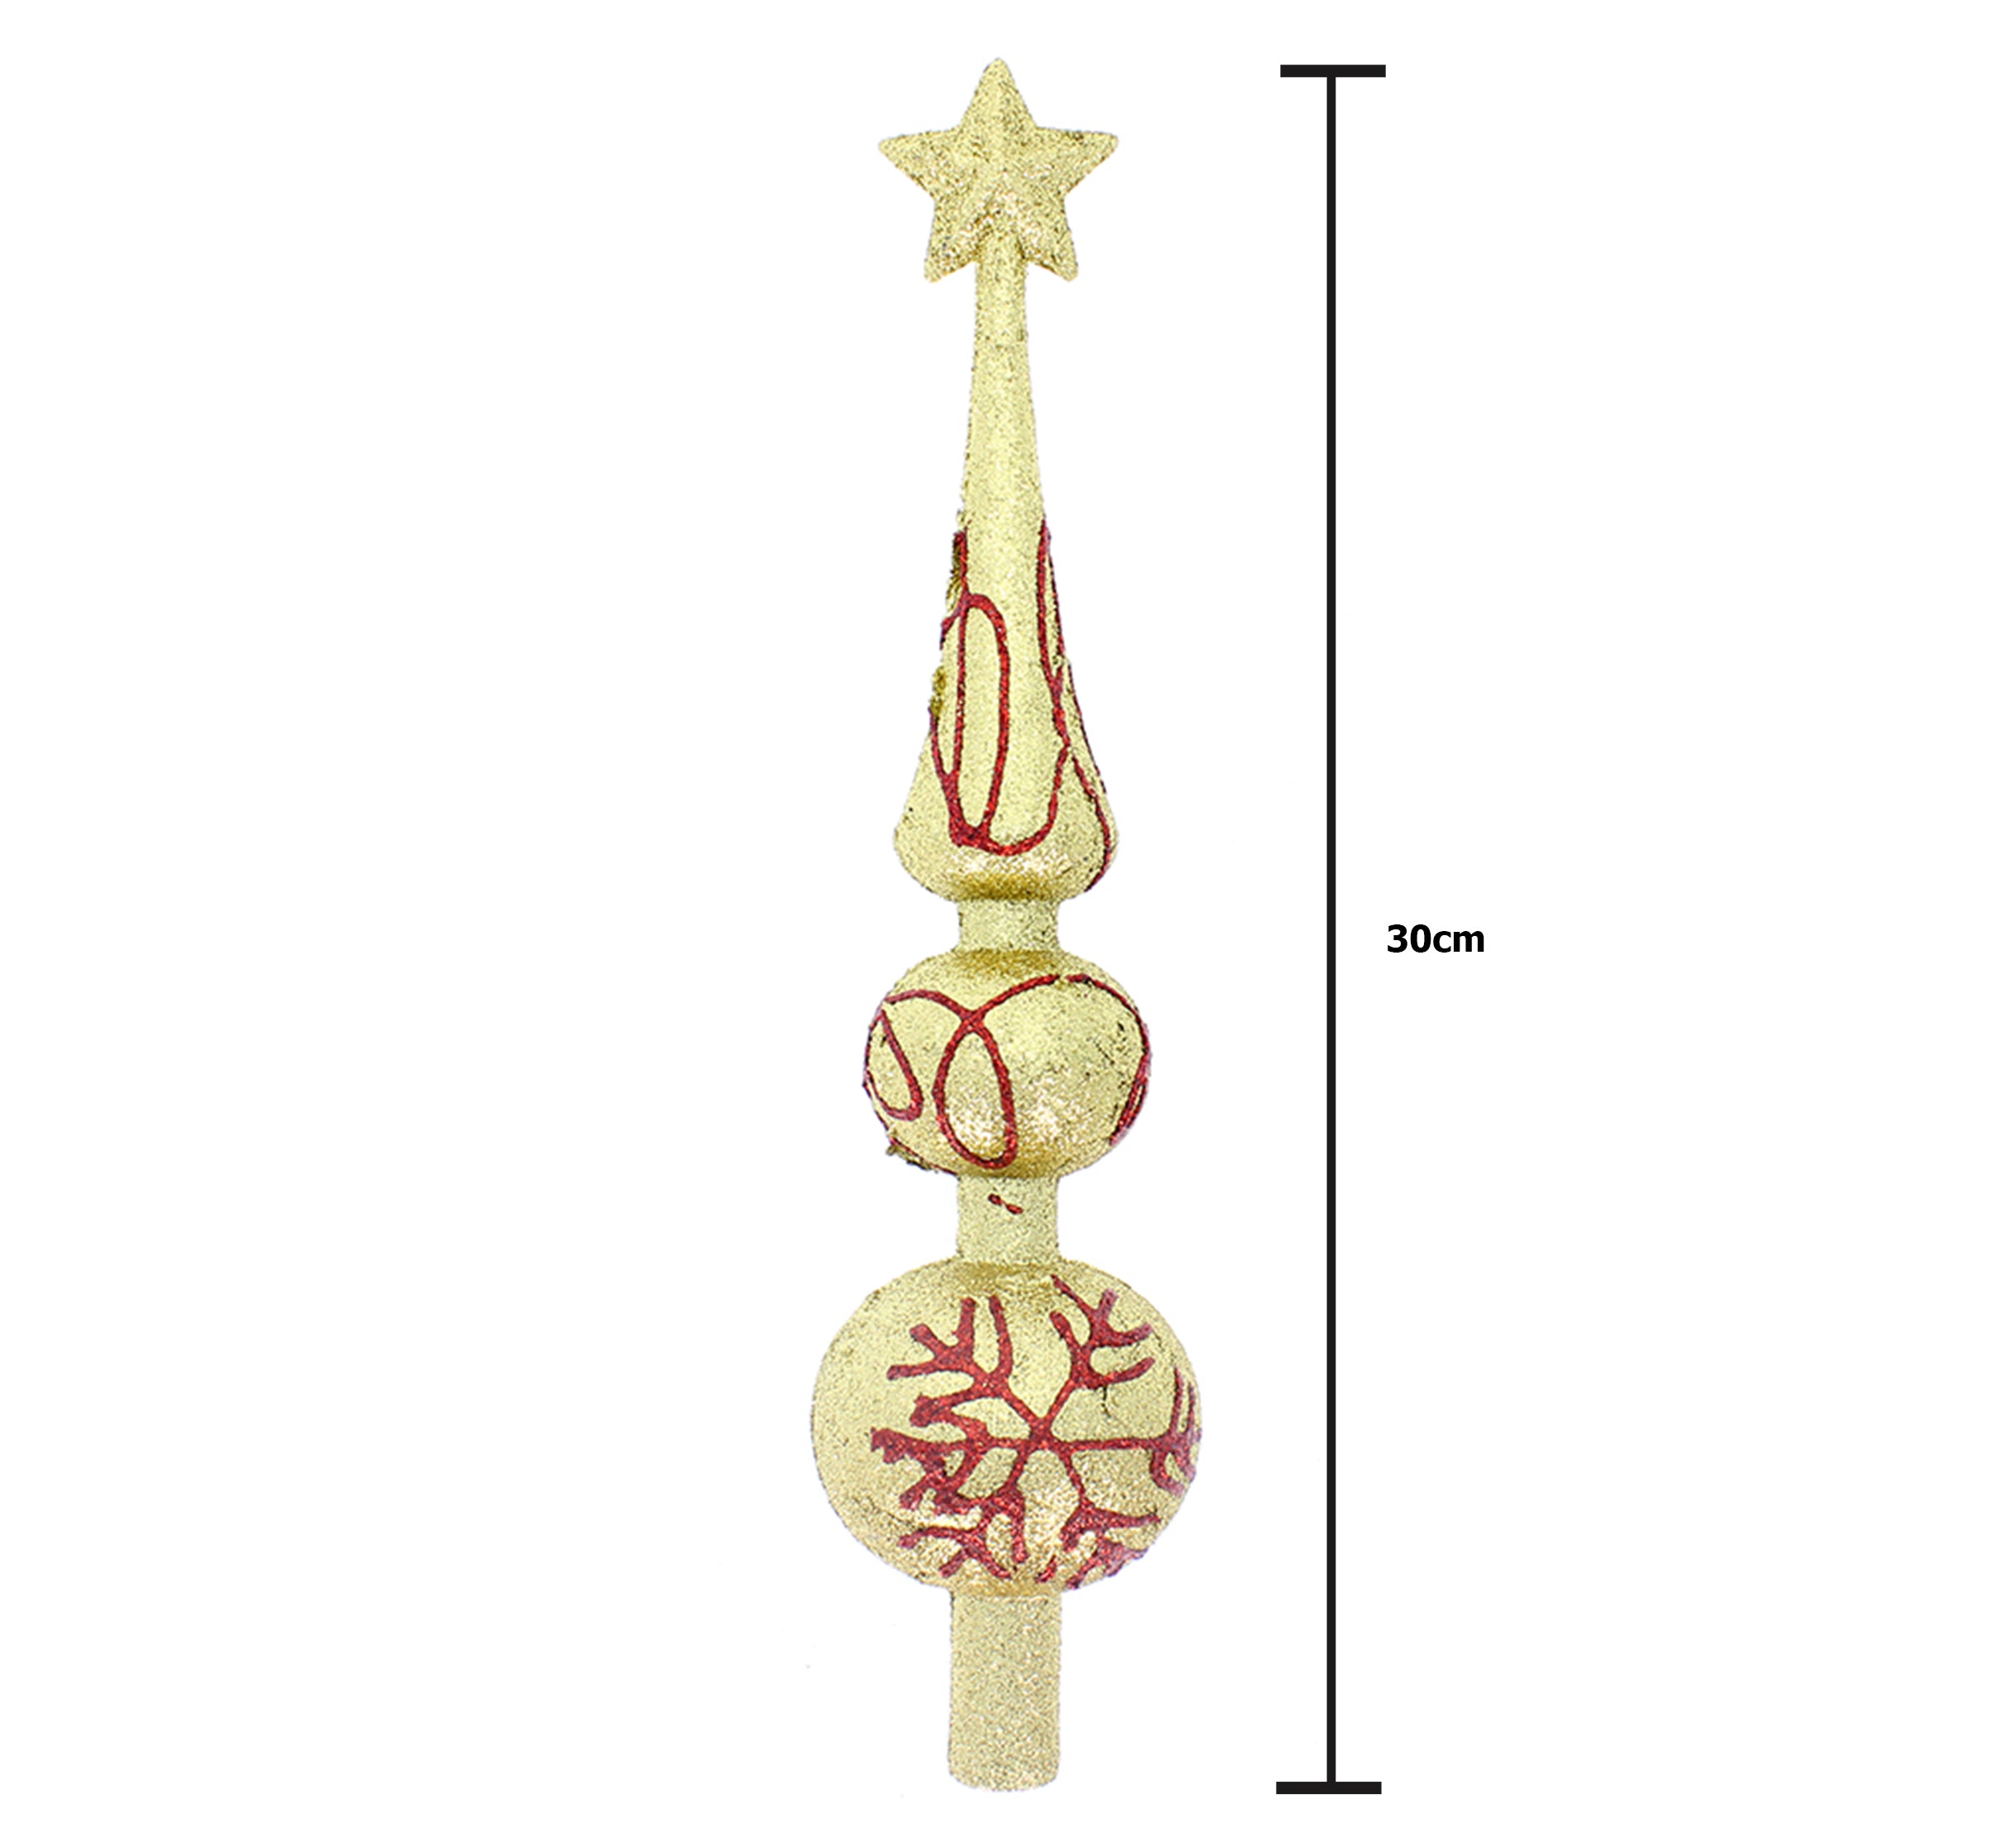 Christmas Finial Tree Topper 30Cm- Gold